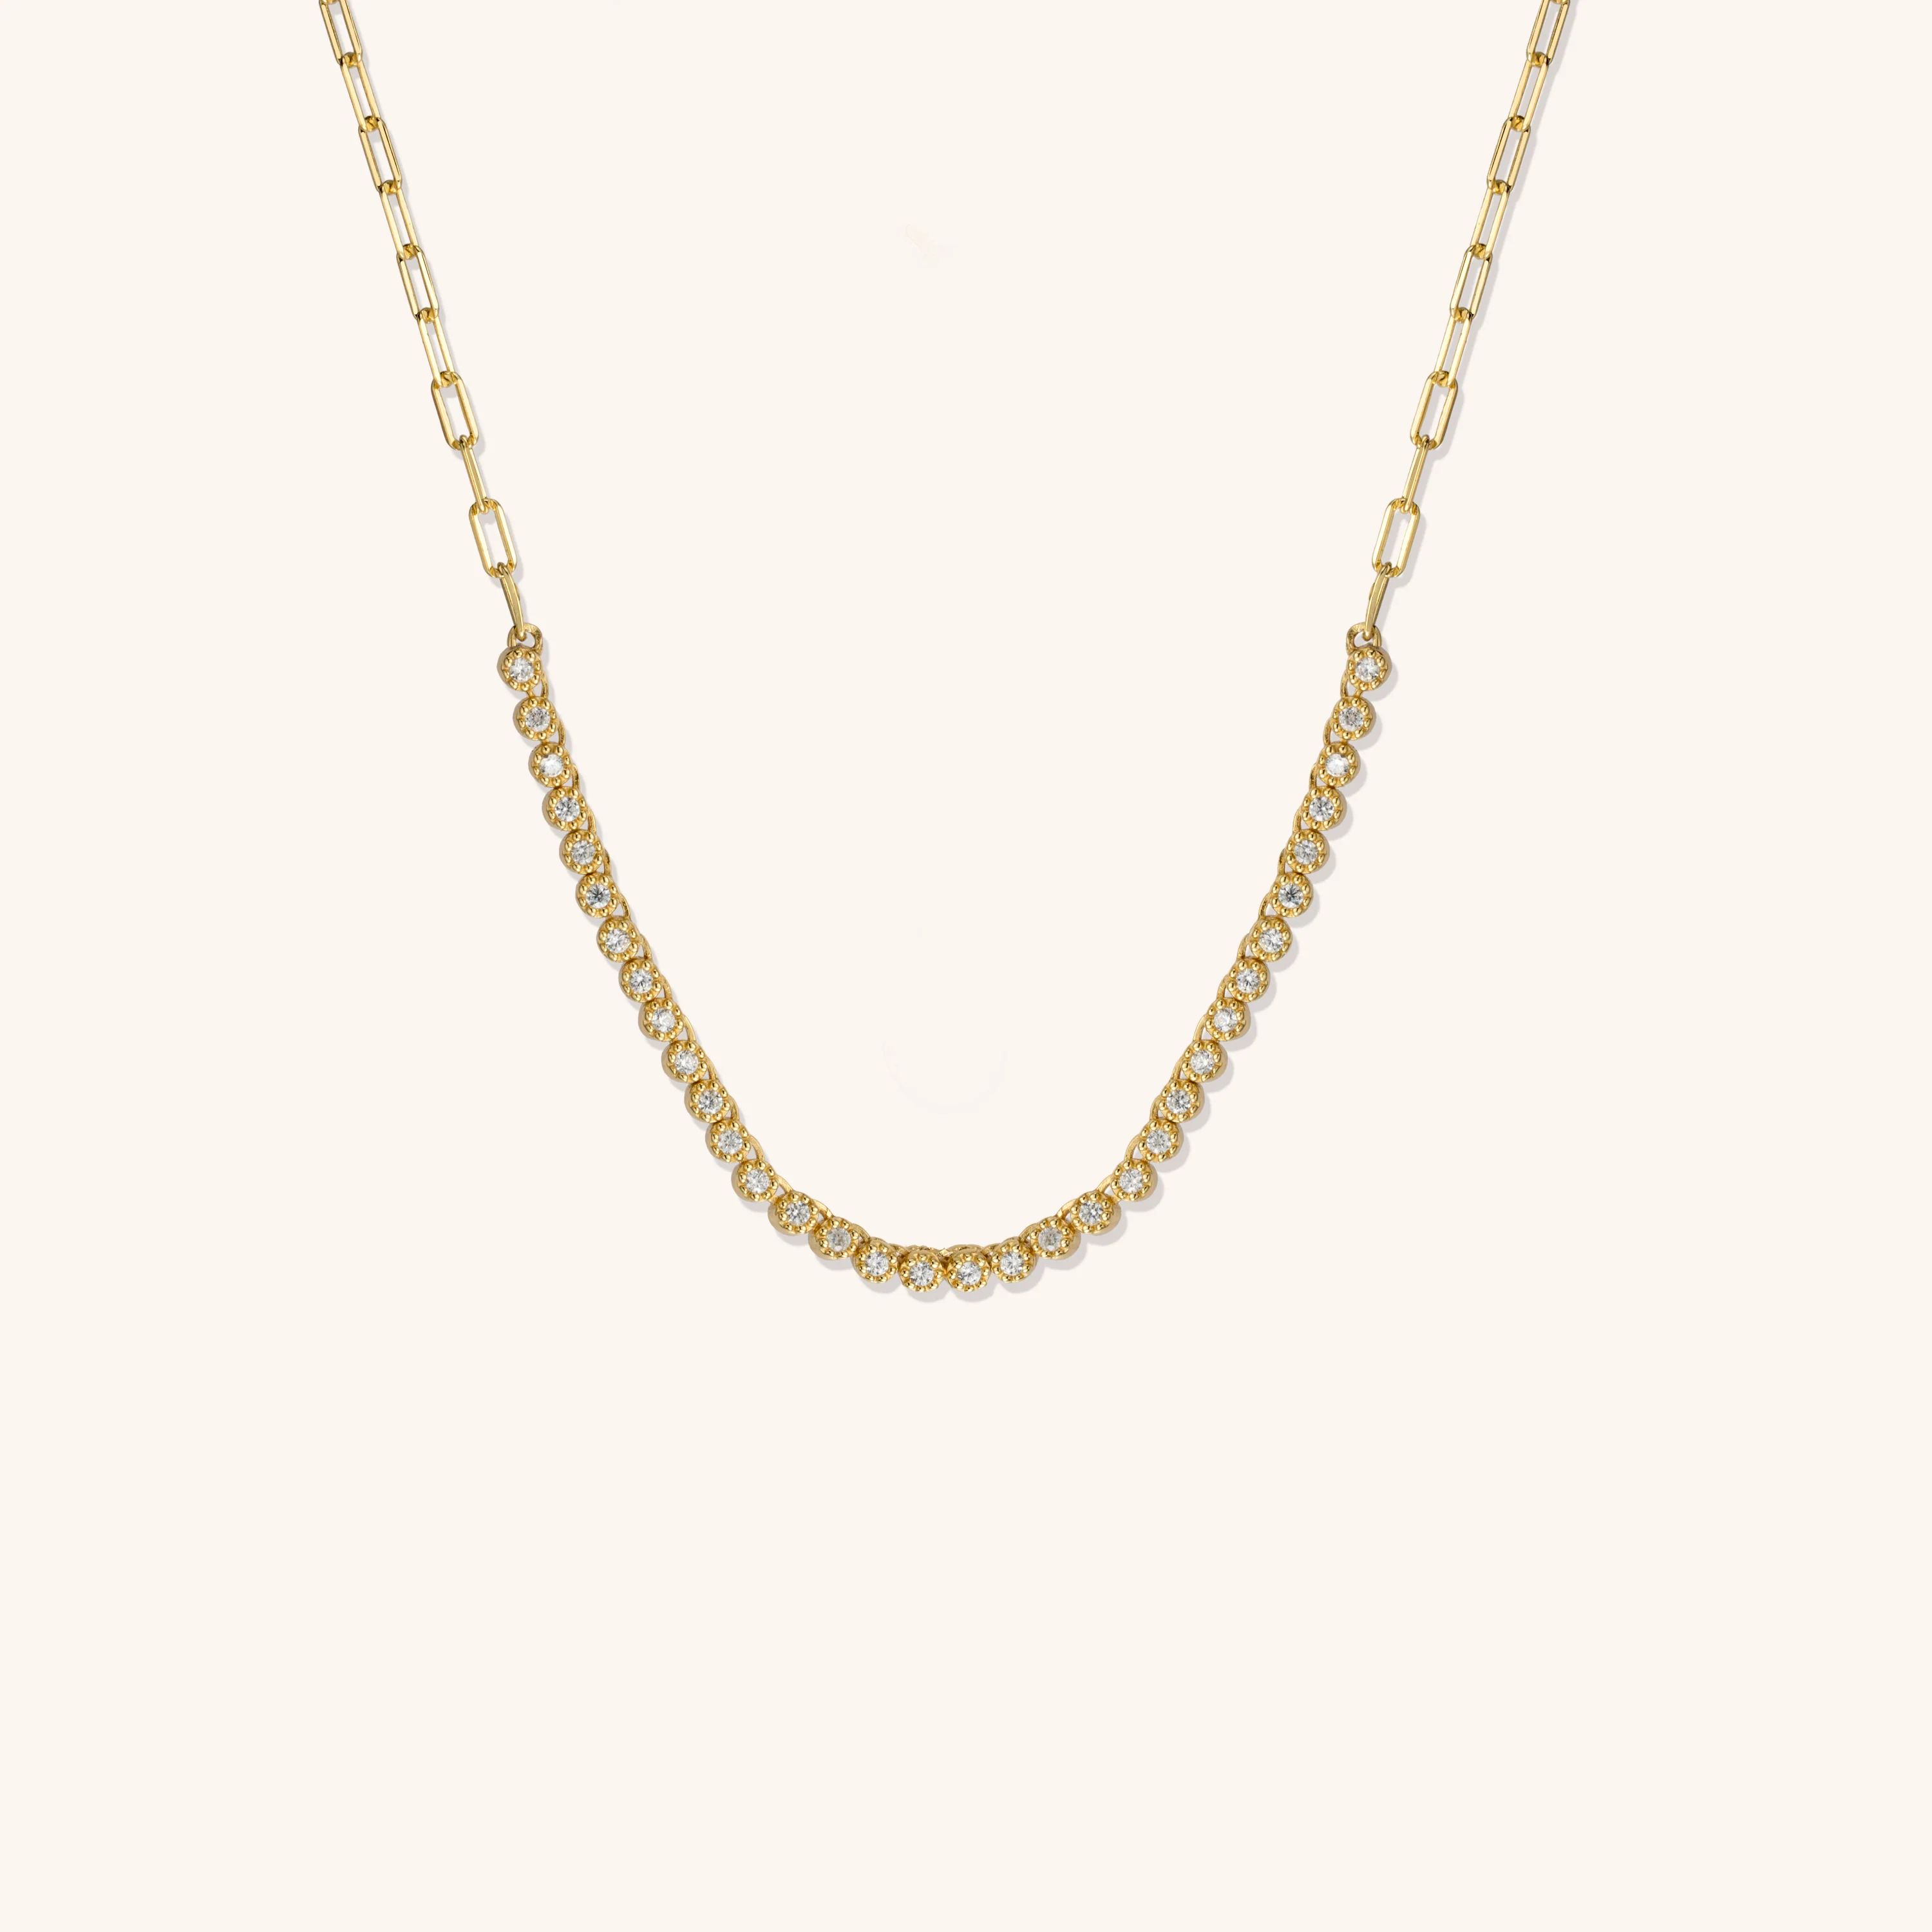 Gold Digger Necklace | Victoria Emerson